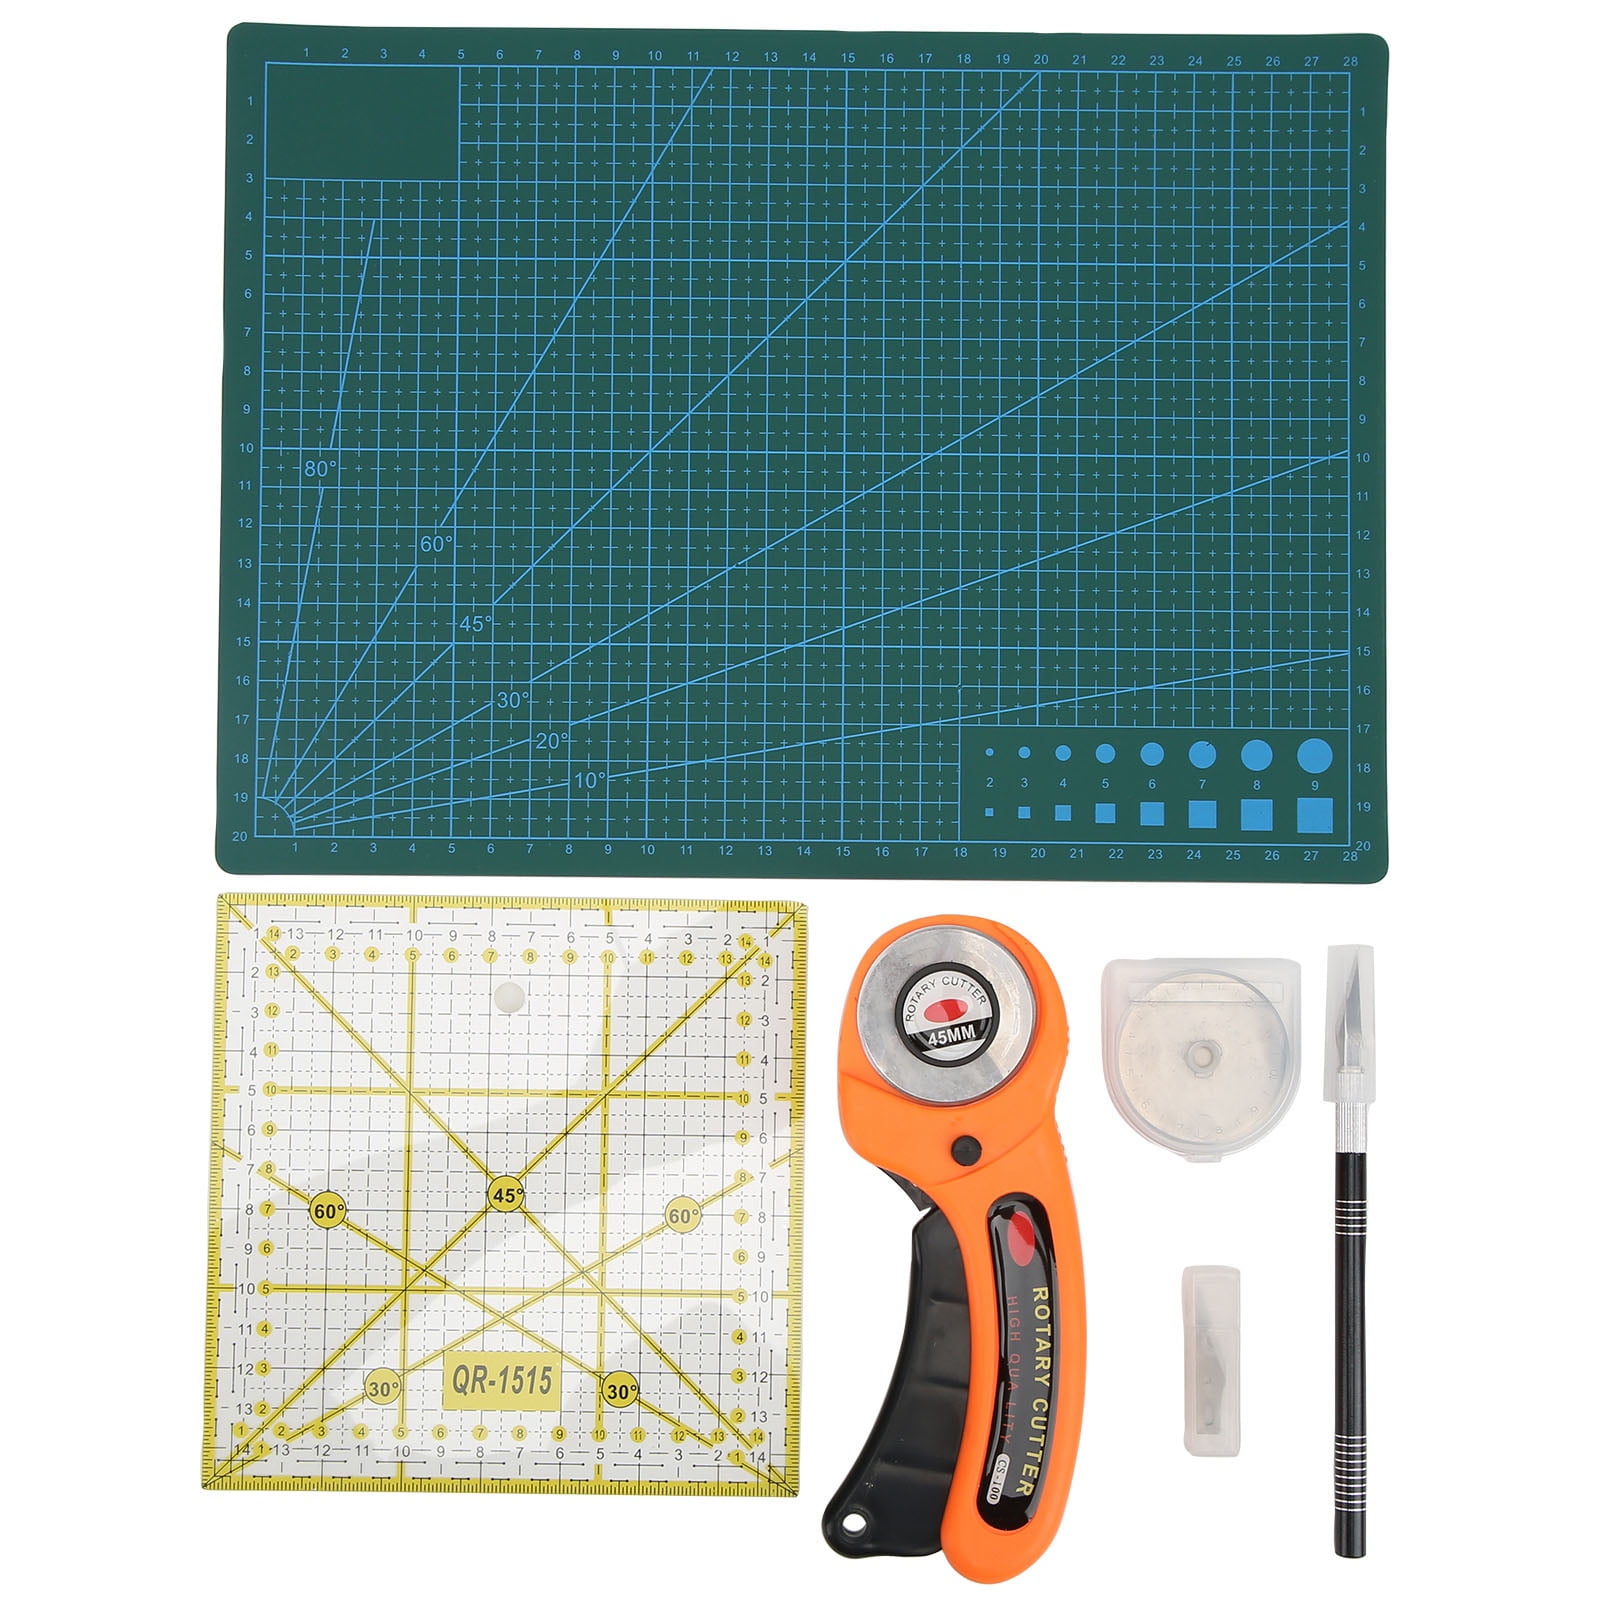 Wa Portman Rotary Cutter Set & Cutting Mat for Sewing - 45mm Rotary Cutter for Fabric & 5 Blades - 24x36 in Fabric Cutting Mat - 6x24 in Acrylic